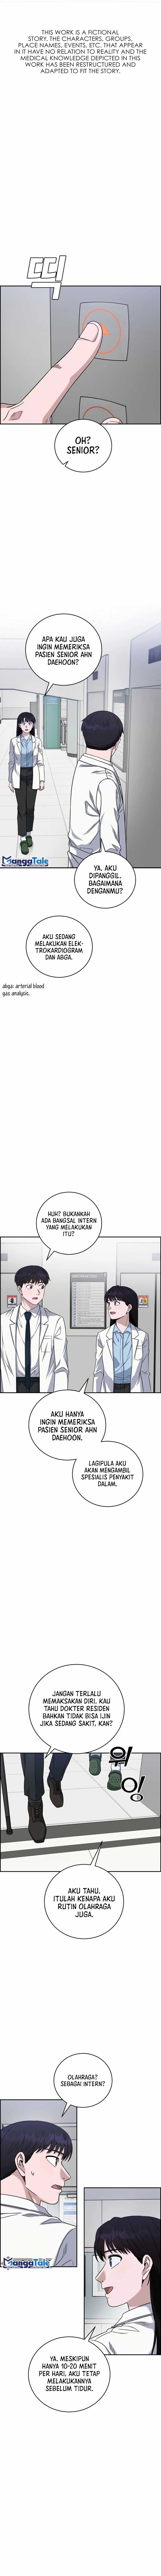 A.I Doctor Chapter 93